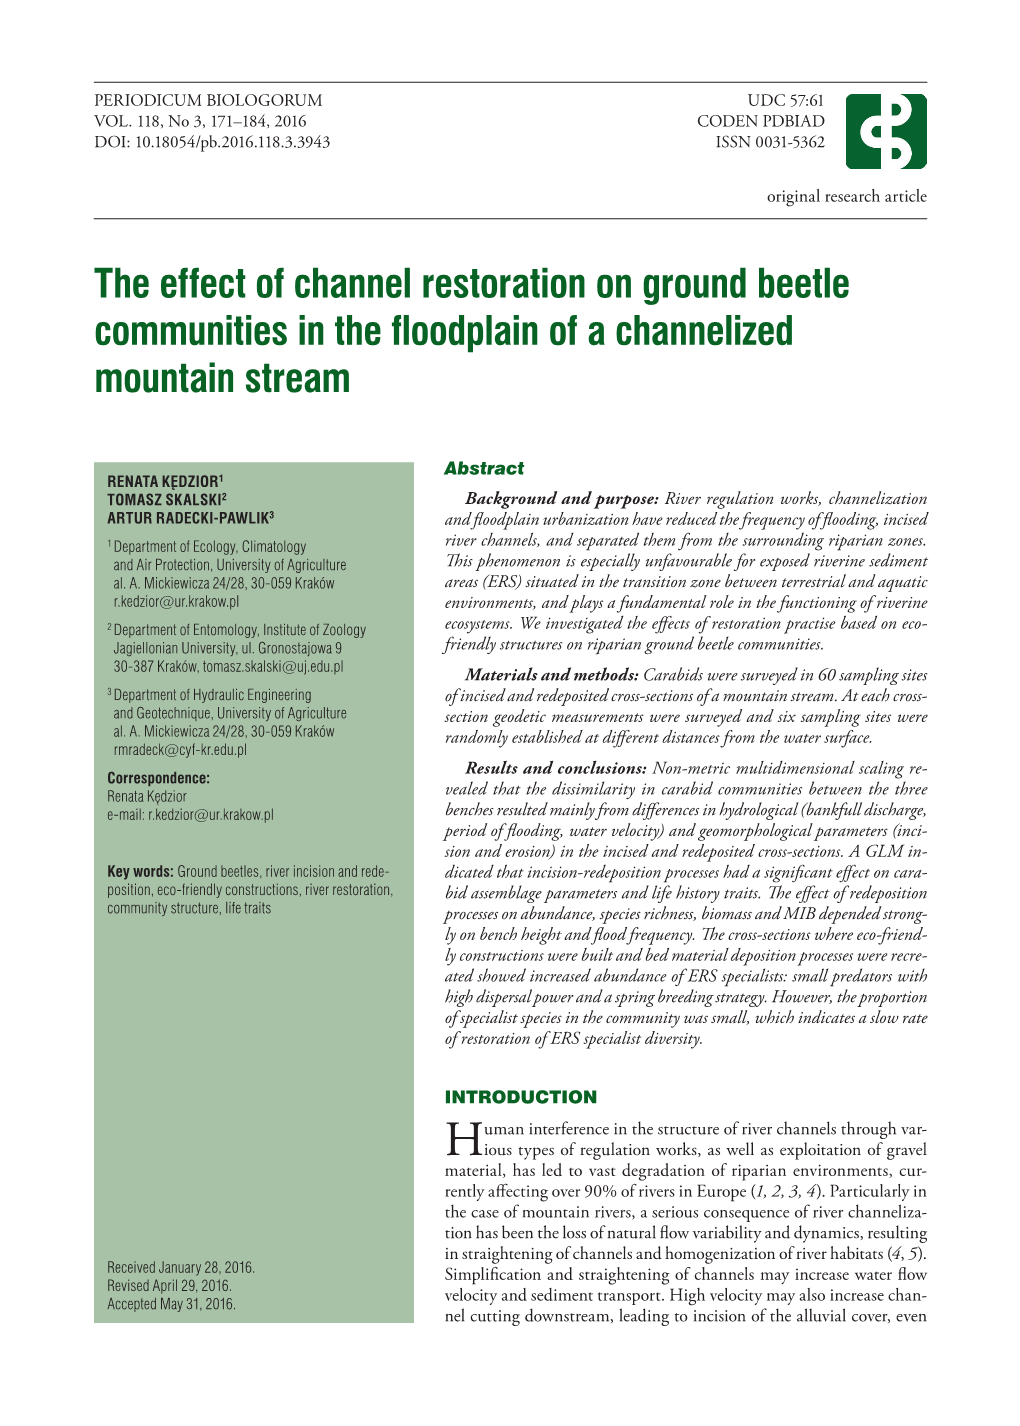 The Effect of Channel Restoration on Ground Beetle Communities in the Floodplain of a Channelized Mountain Stream